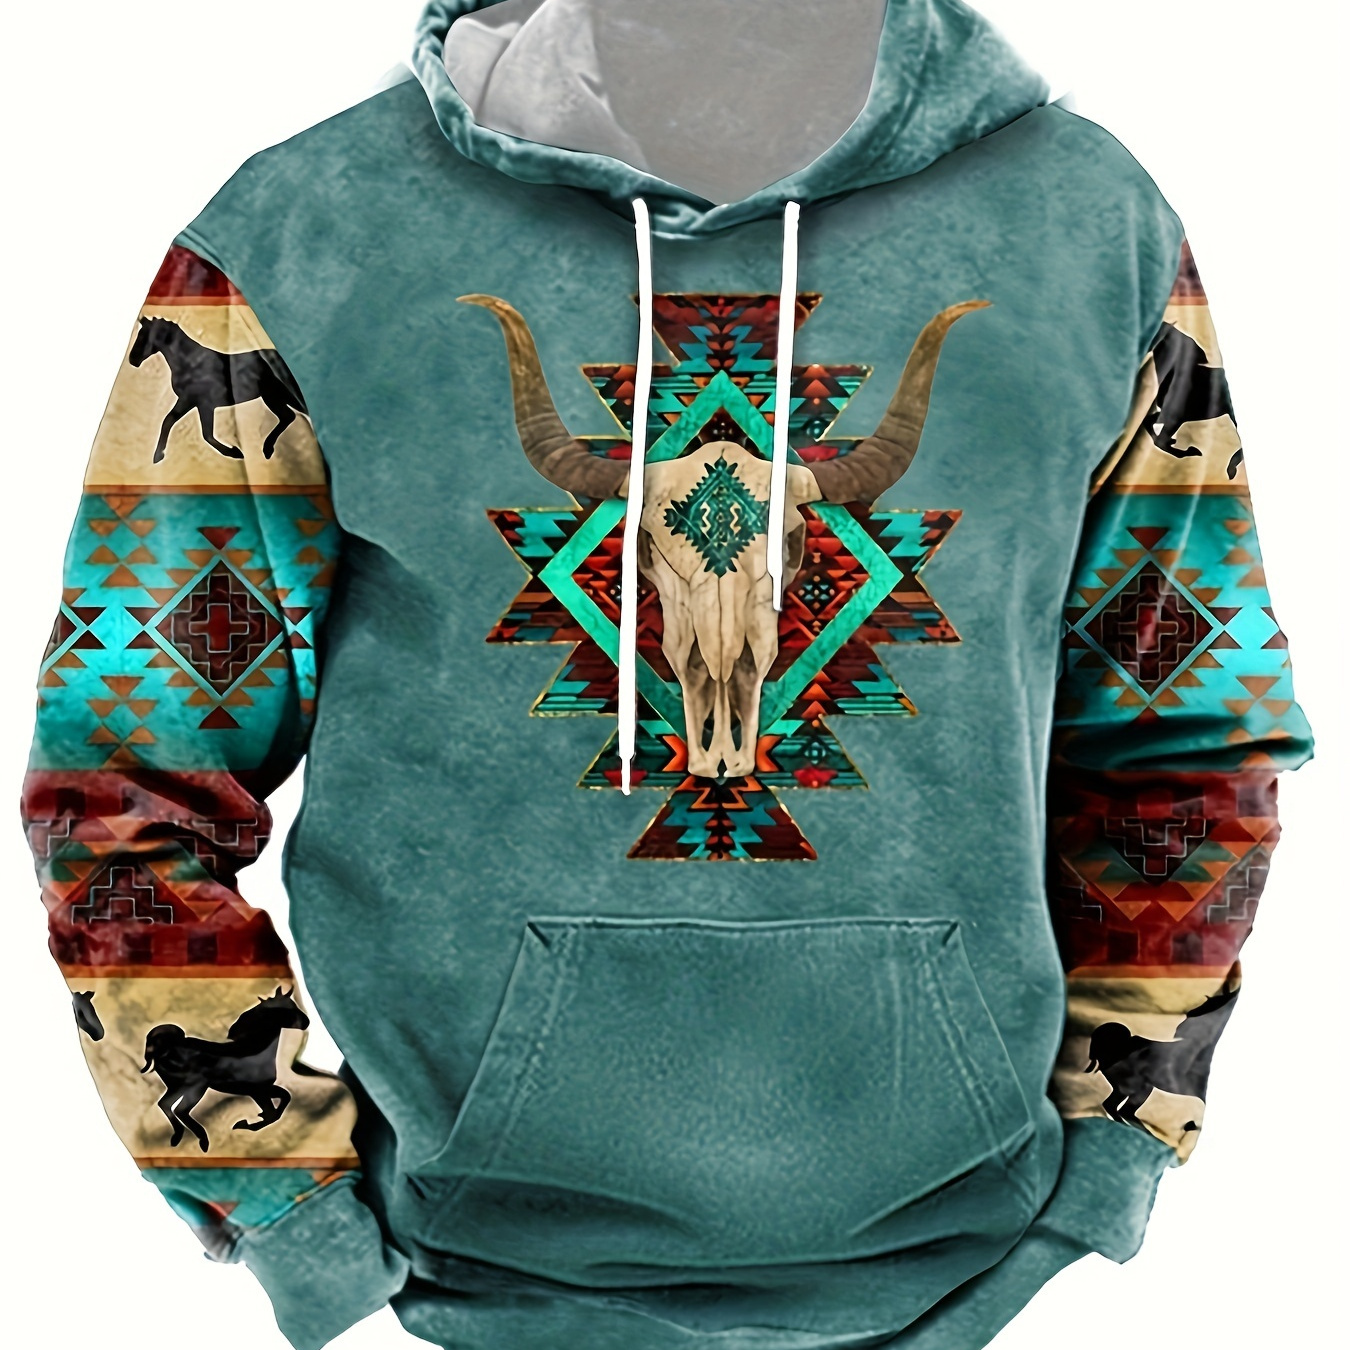 

Ethnic Pattern Print Hoodie, Cool Hoodies For Men, Men's Casual Graphic Design Hooded Sweatshirt Streetwear For Winter Fall, As Gifts